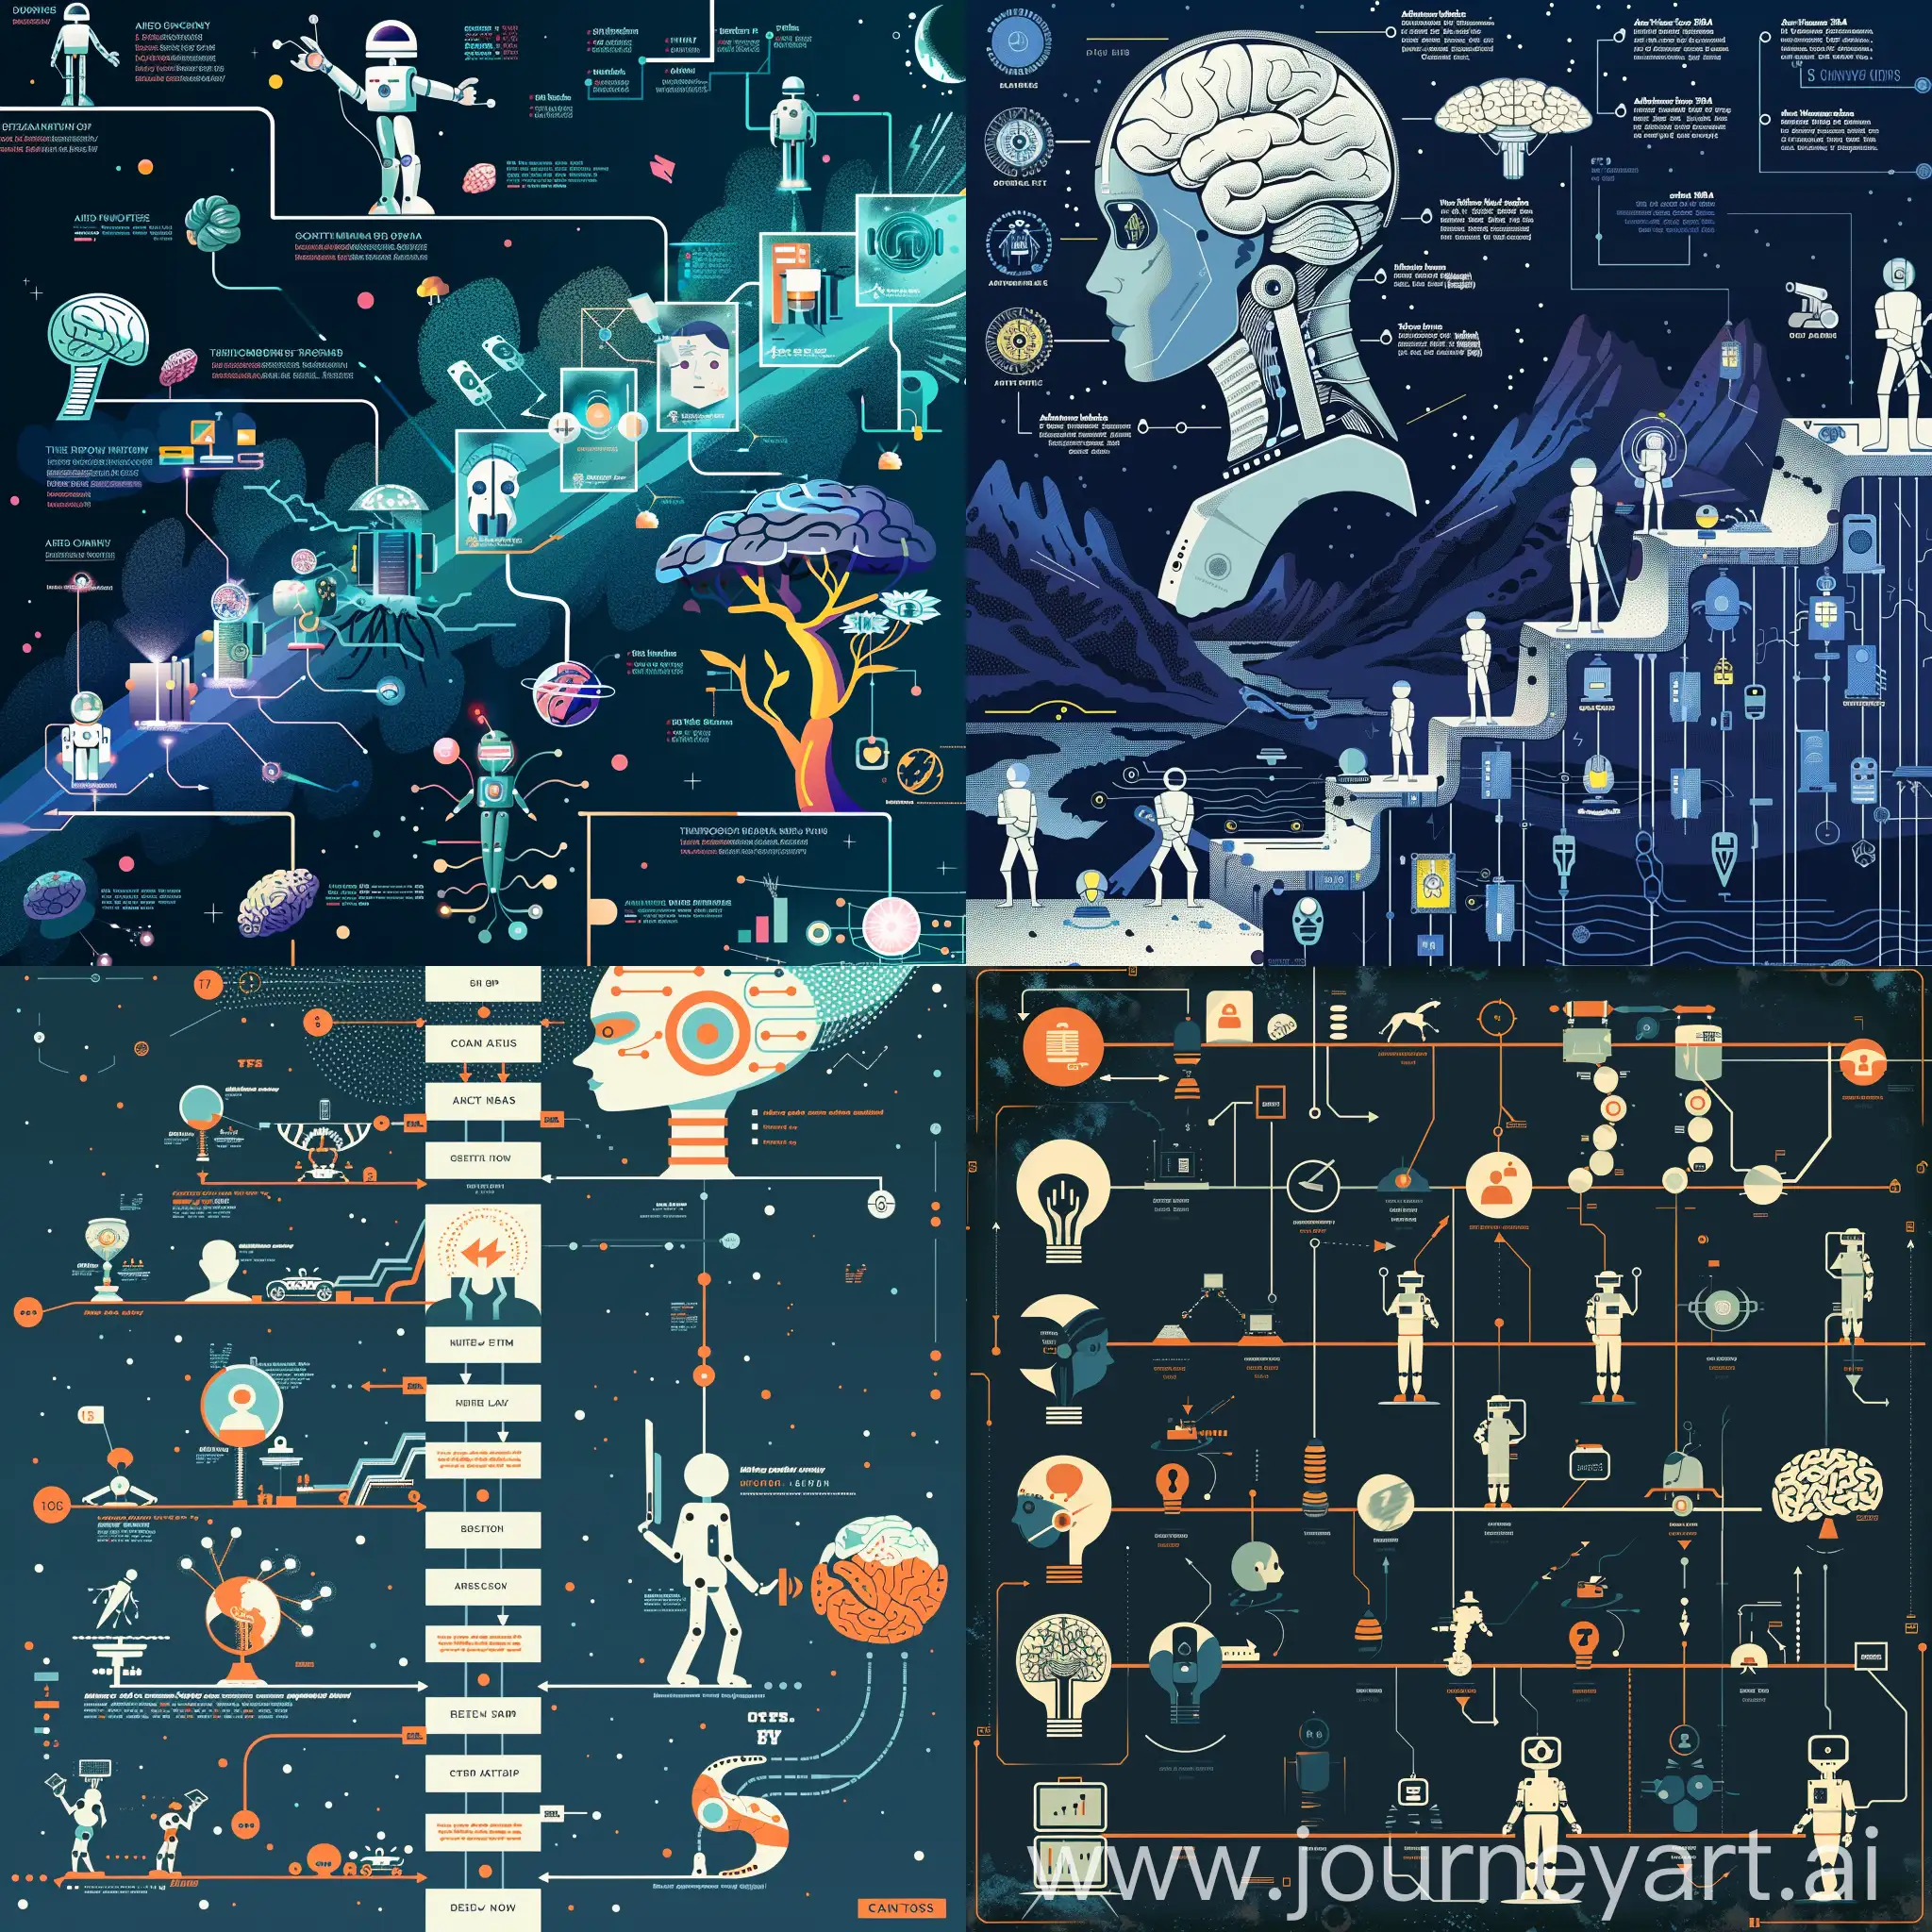 illustration about Artificial Intelligence Timeline from past till now 16:9